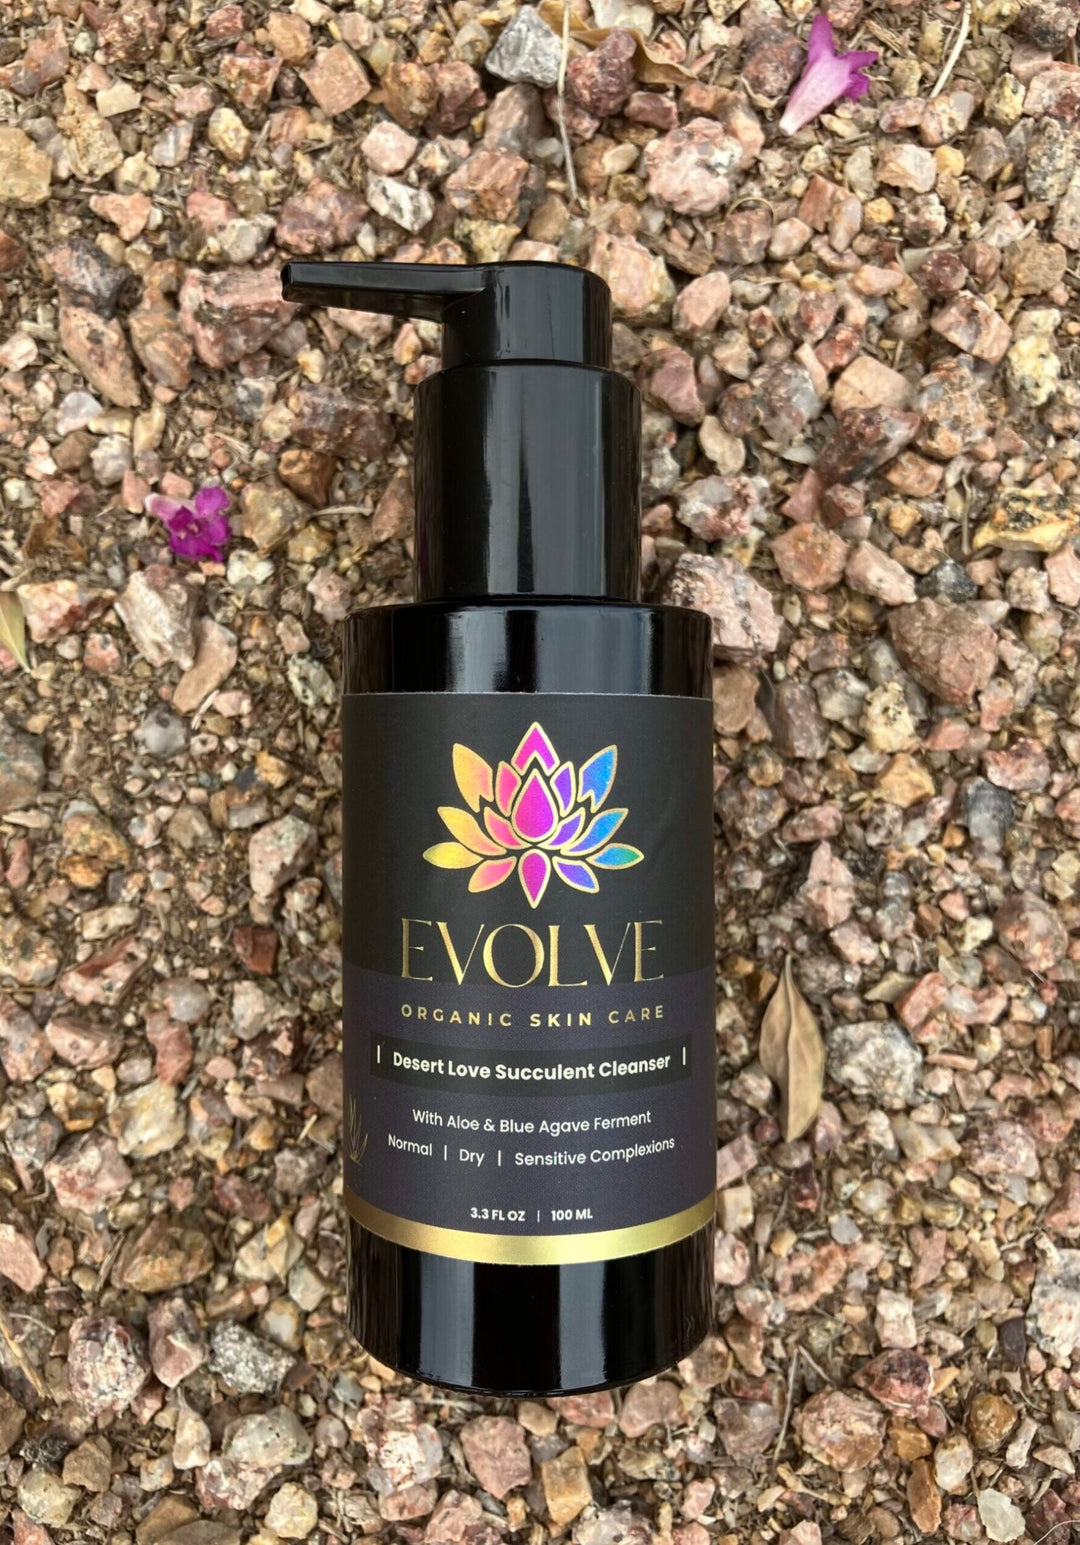 A photo of evolve organic skin care product on a gravel surface